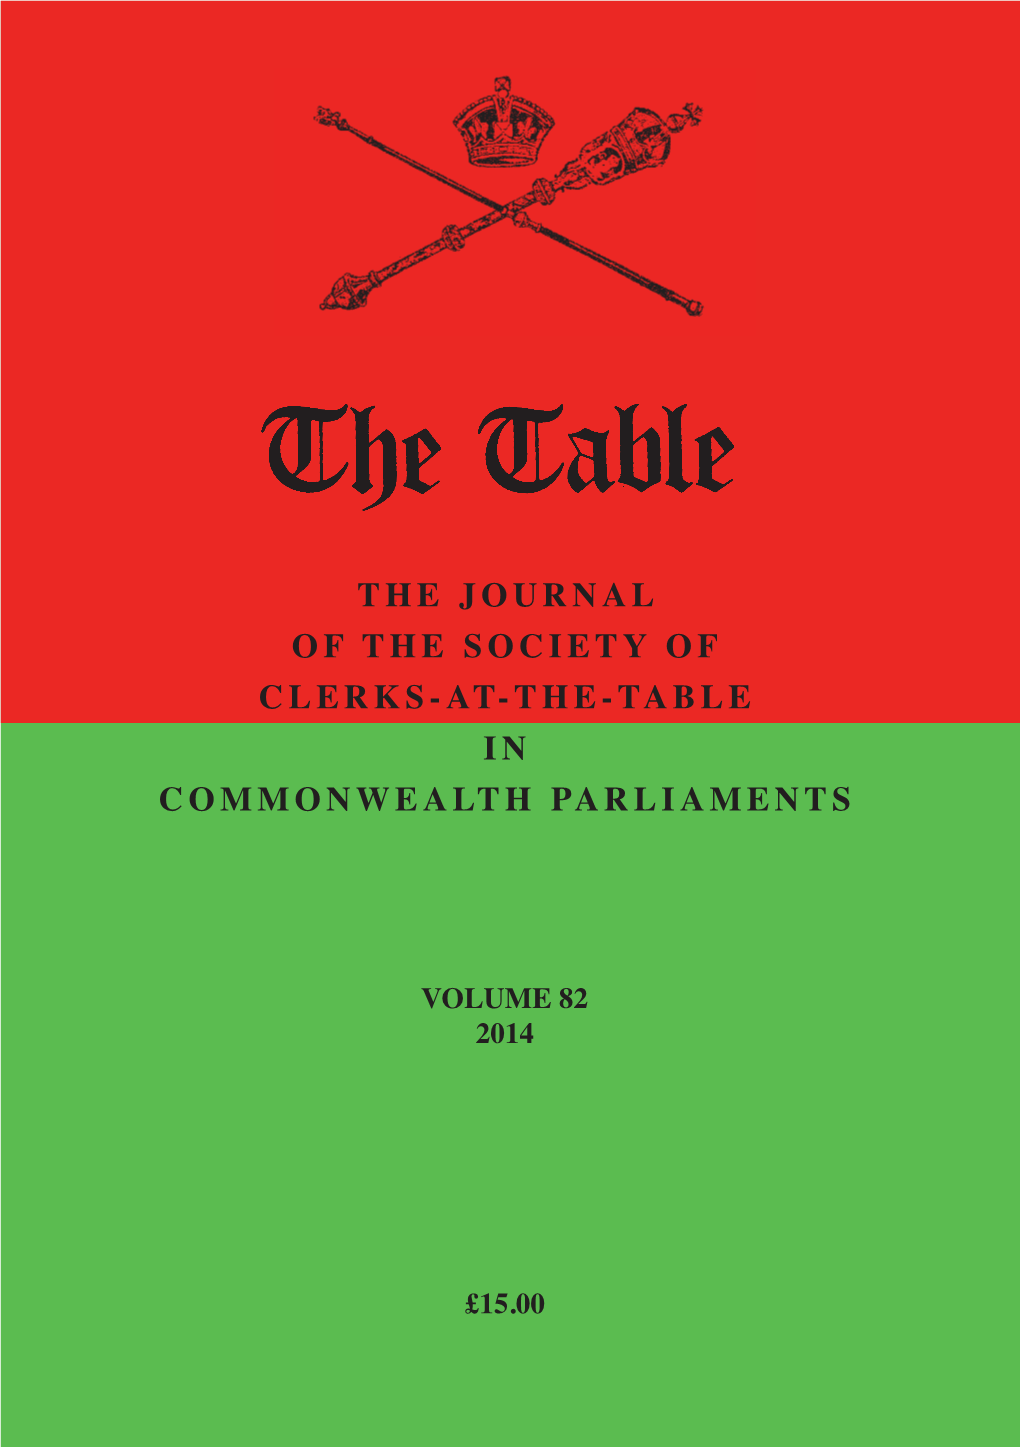 The Table, Volume 82, 2014